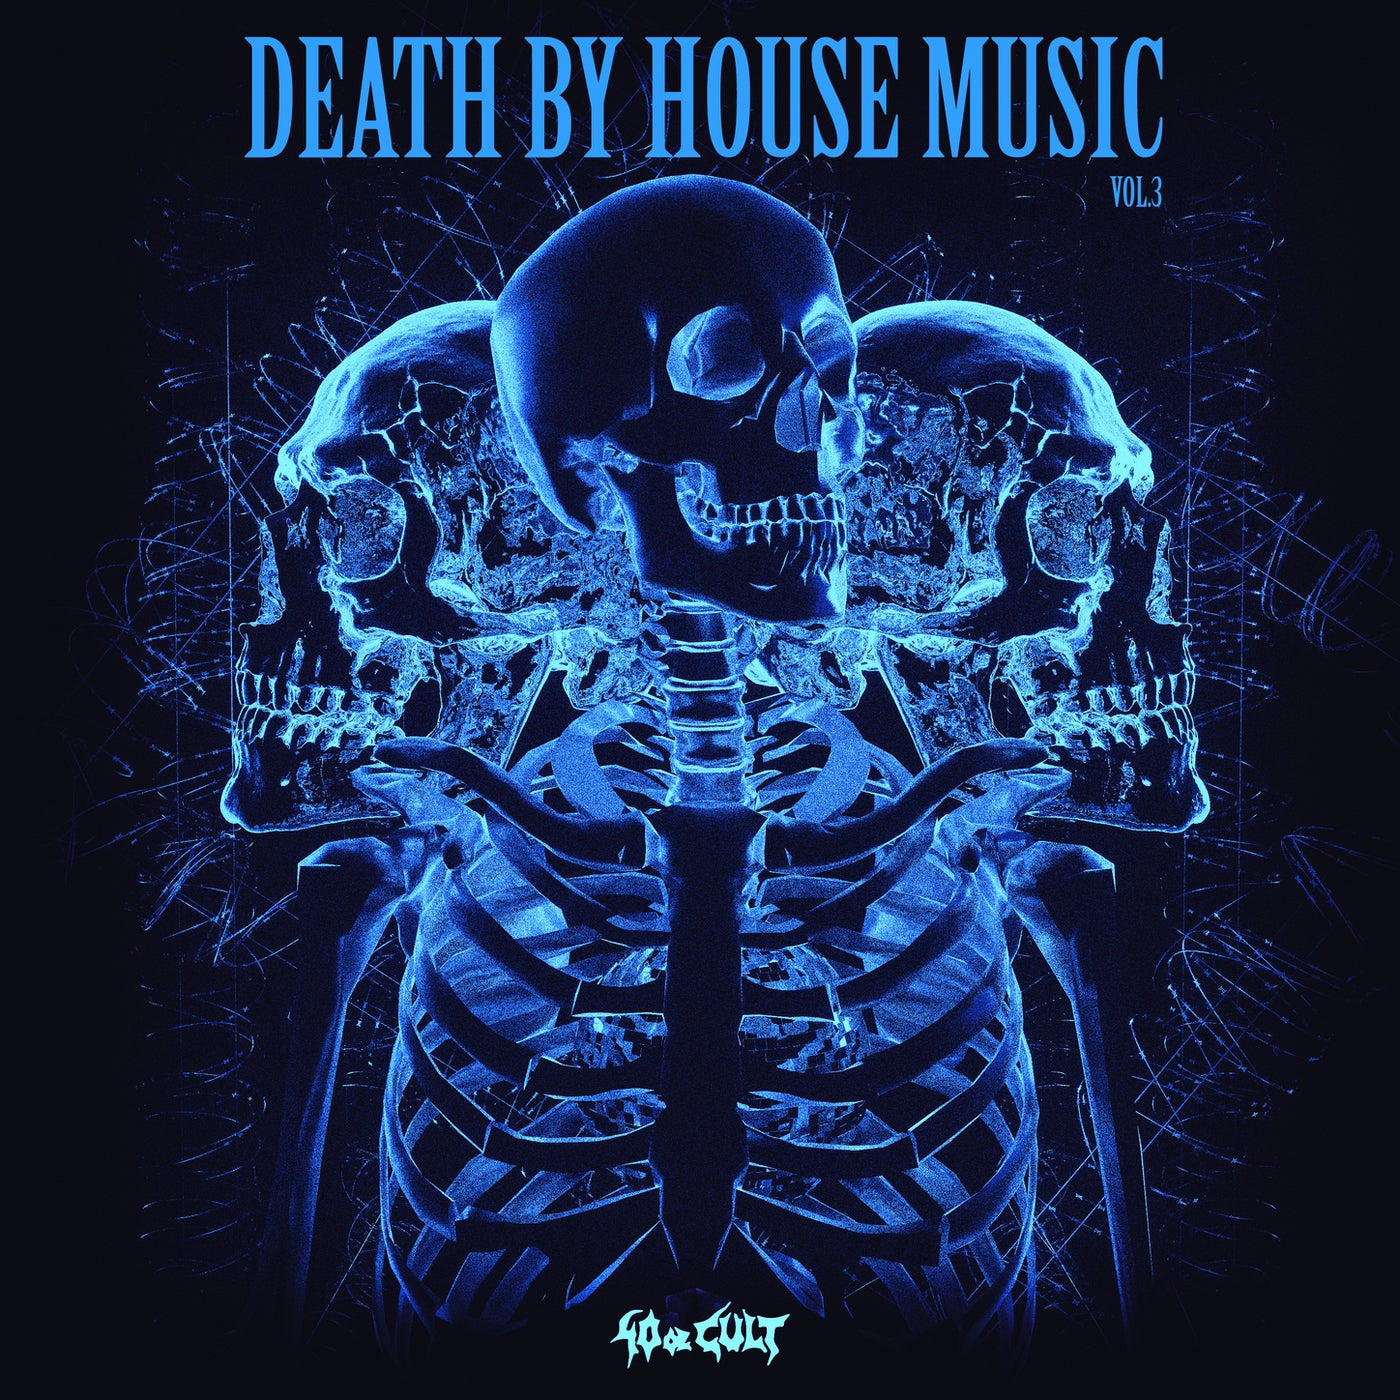 Death By House Music Vol. 3